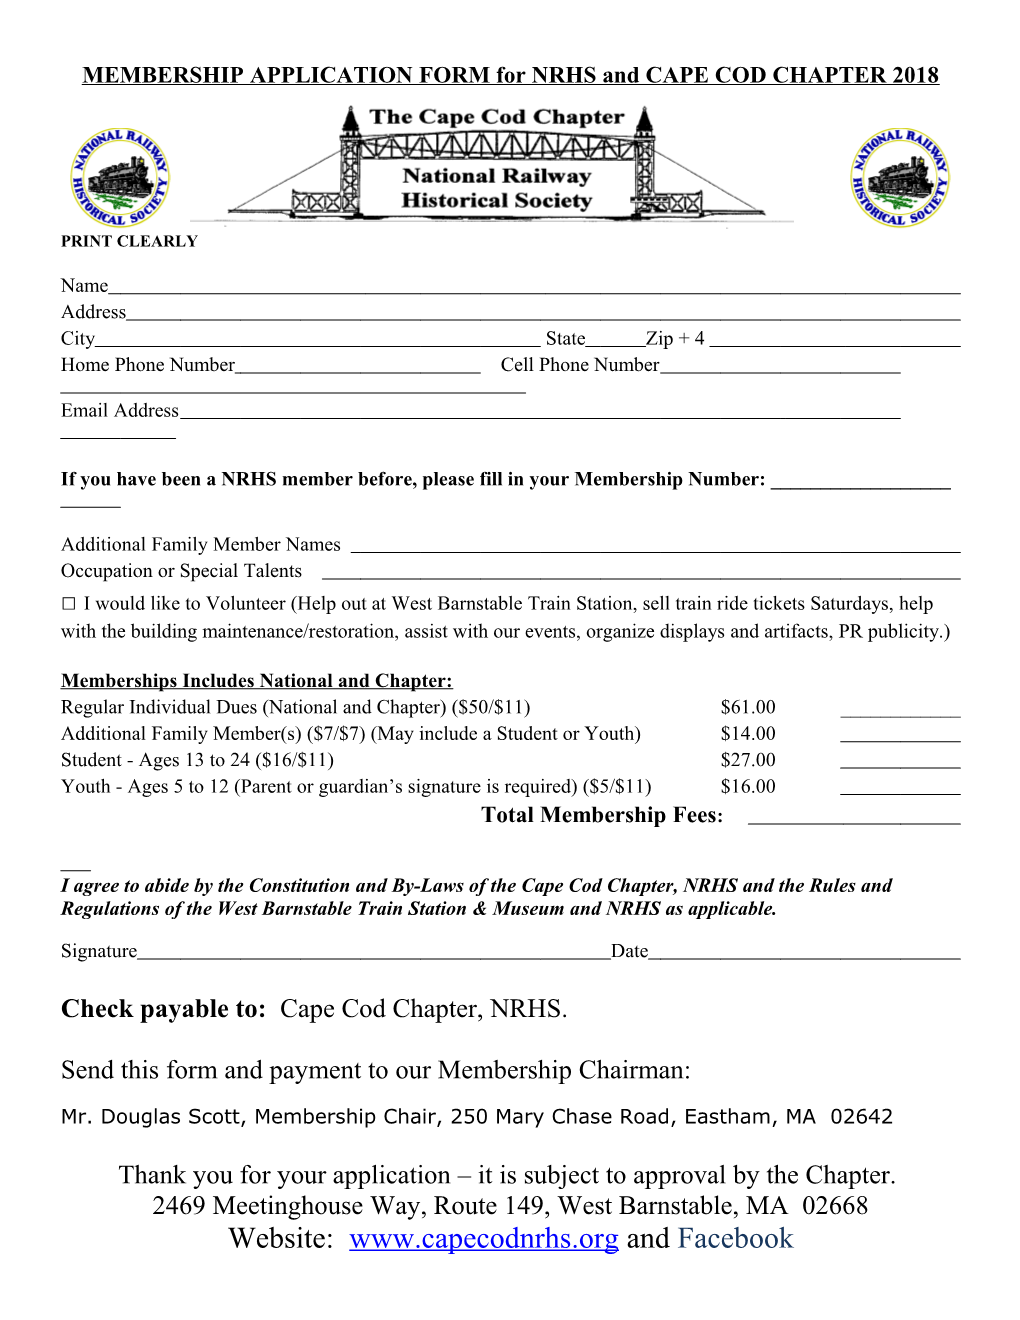 MEMBERSHIP APPLICATION FORM for NRHS and CAPE COD CHAPTER 2018